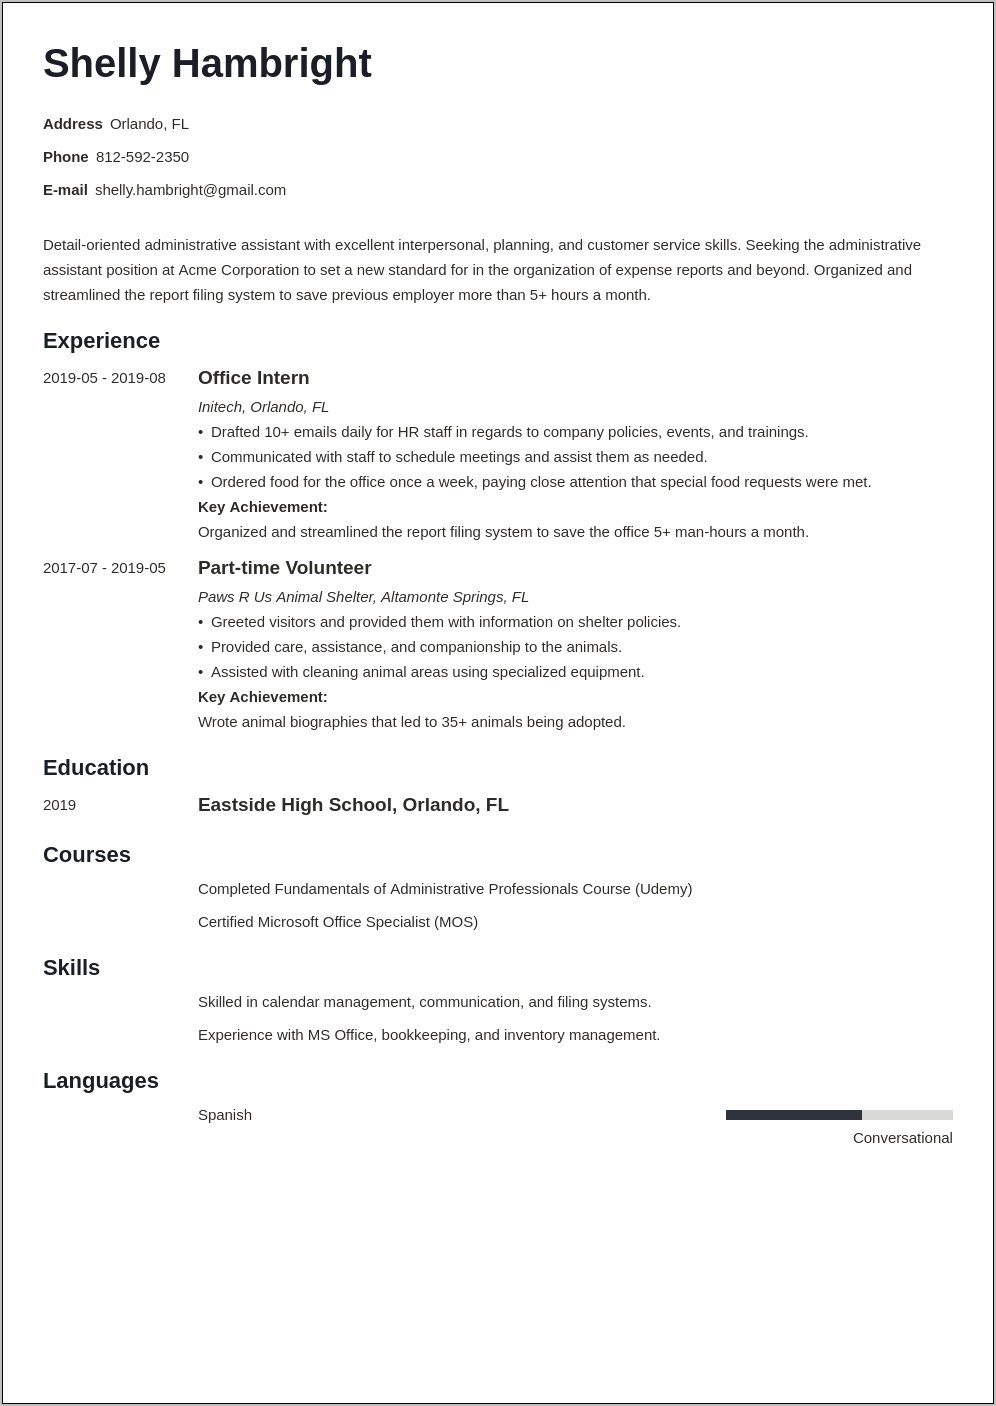 Resume Title Samples For Administrative Assistant